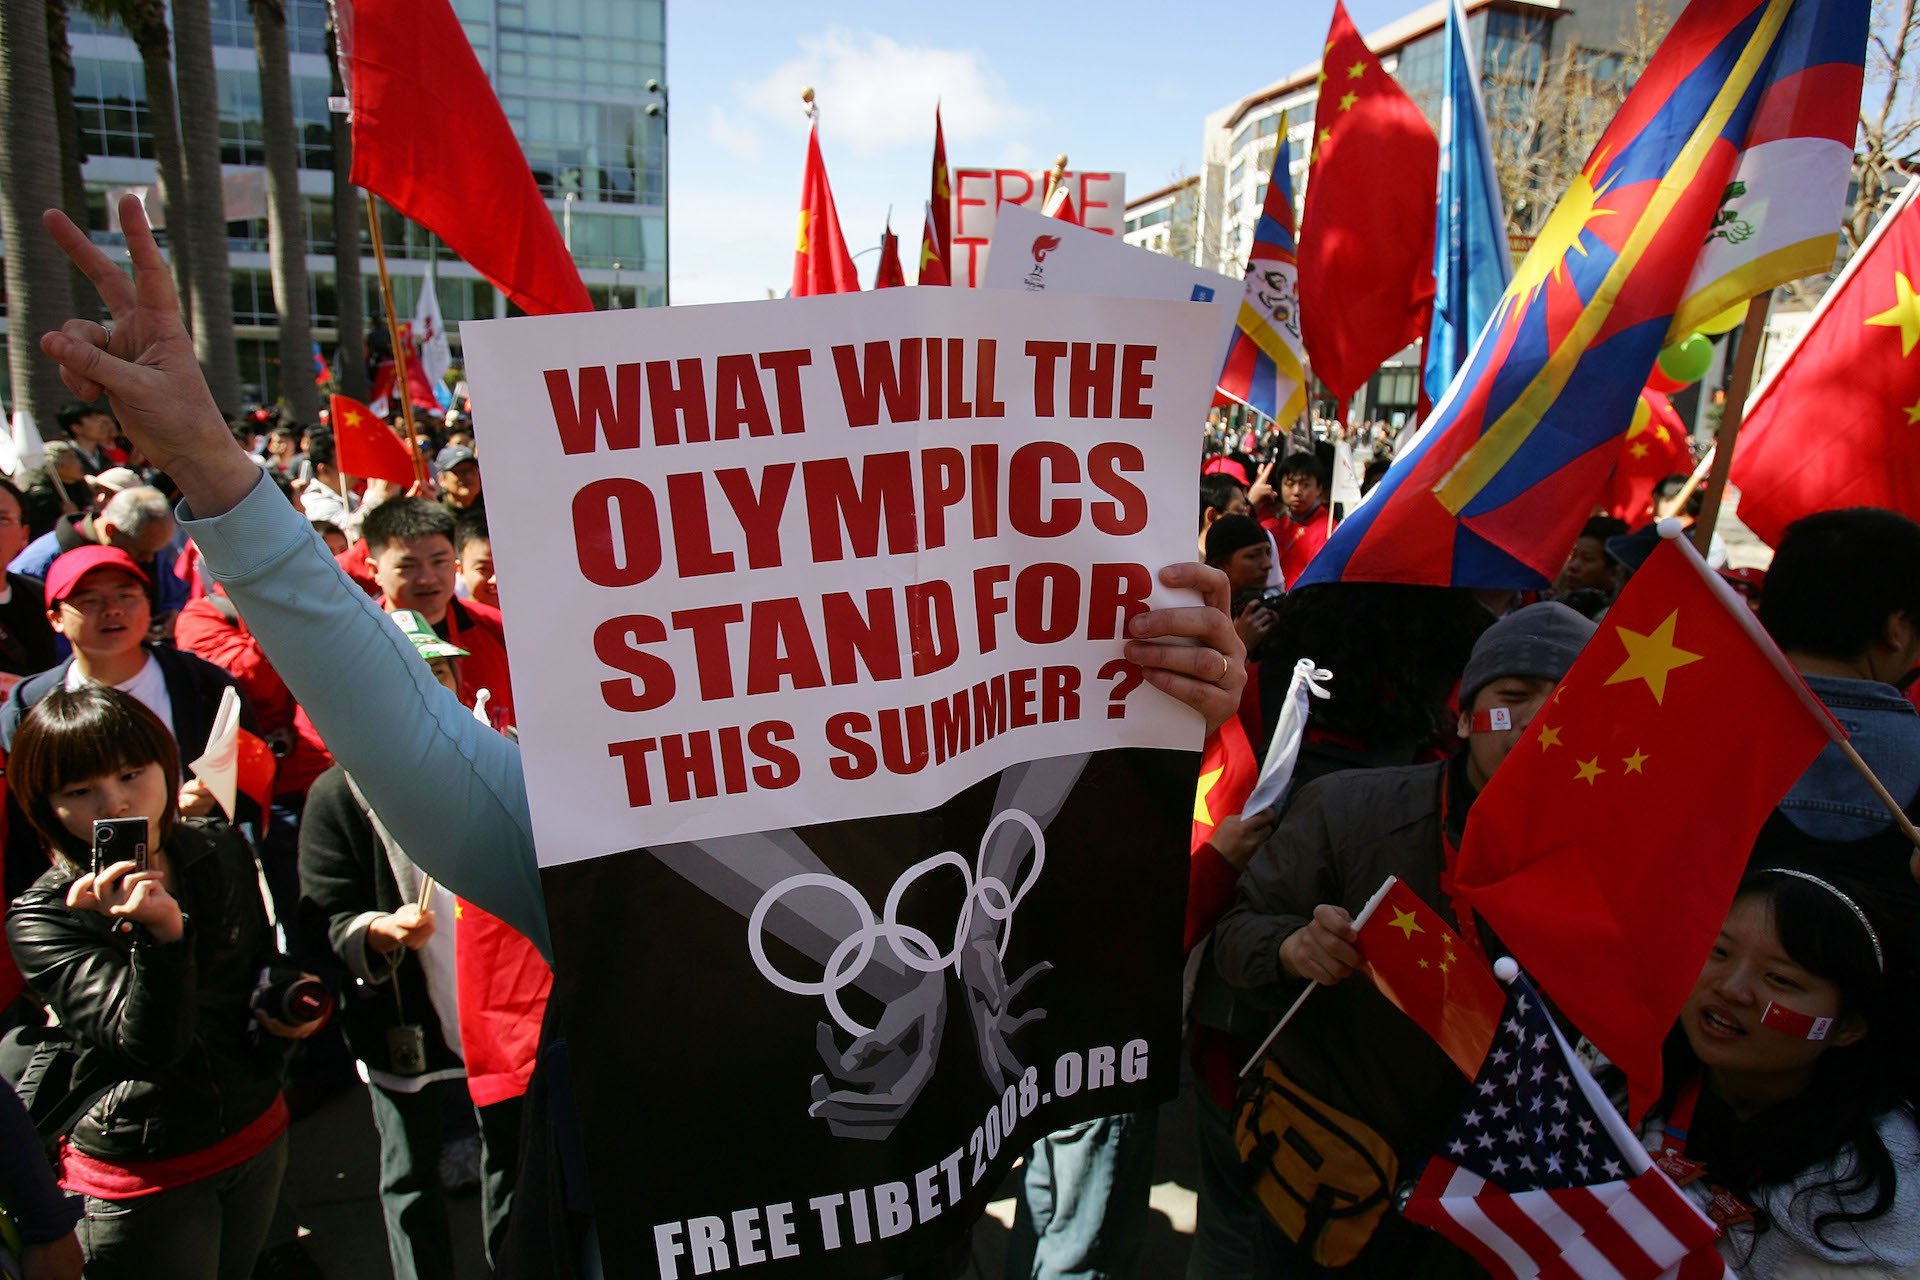  A protester holds a sign as they wait for Olympic Torch to pass. GETTY IMAGES